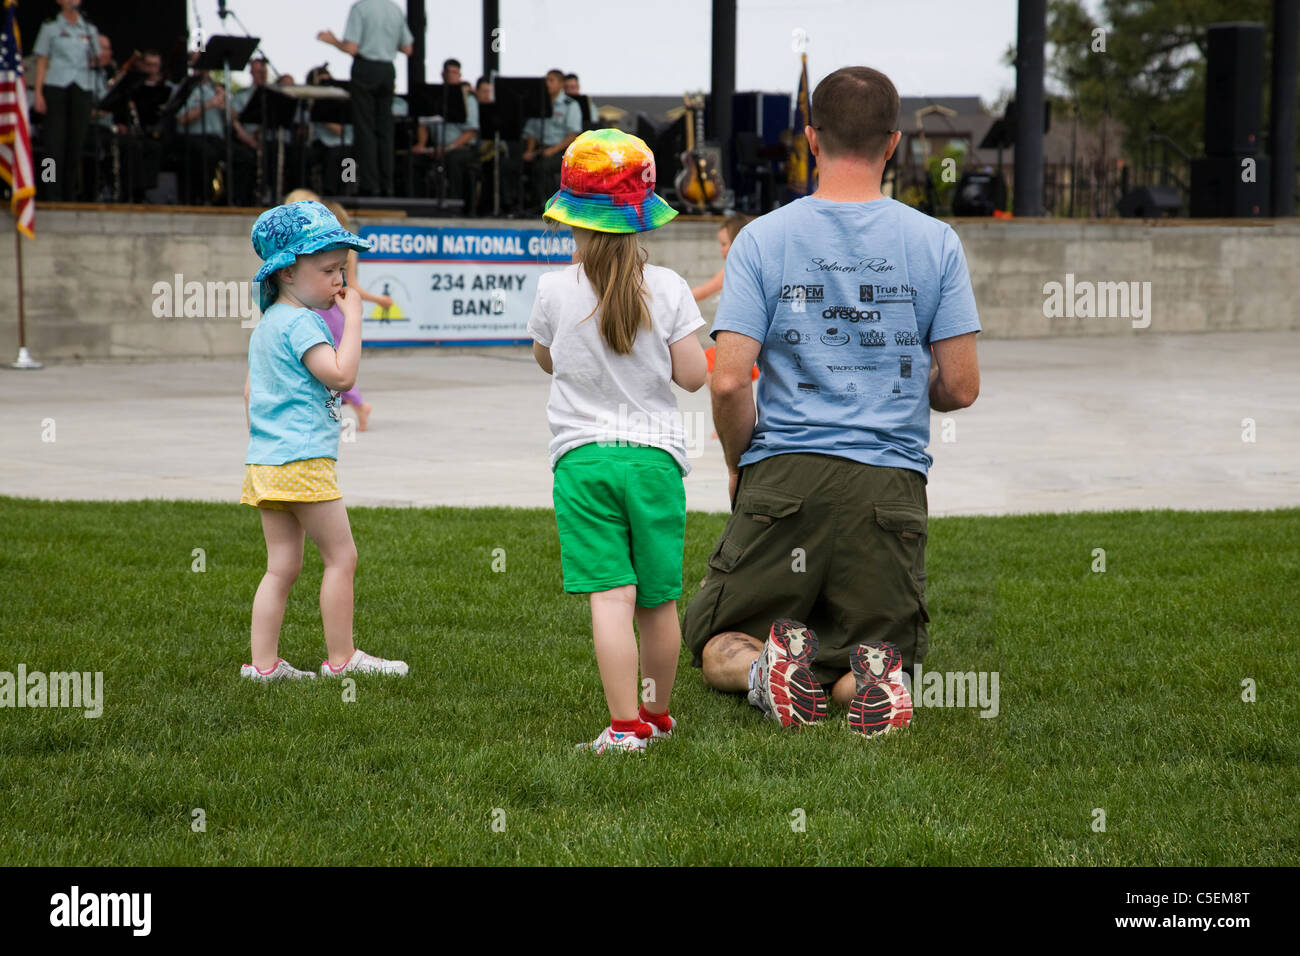 A veteran and his two children listen to the US Army Band at an outdoor concert in Bend, Oregon Stock Photo